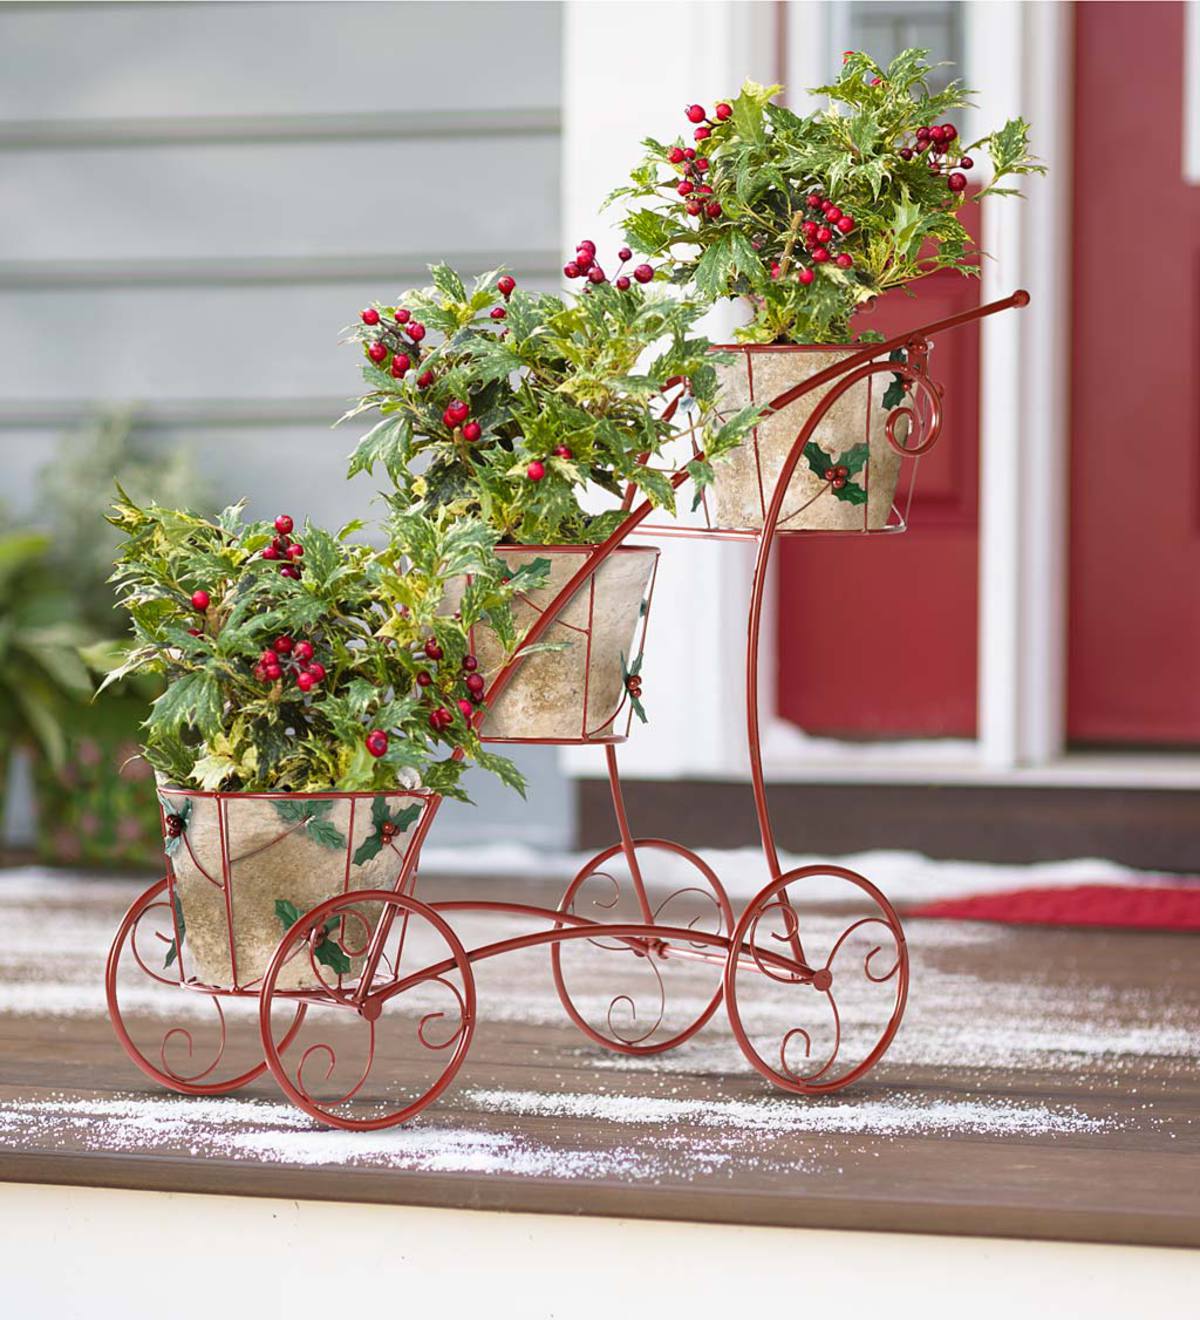 Three Tier Red Plant Stand with Holly Accents